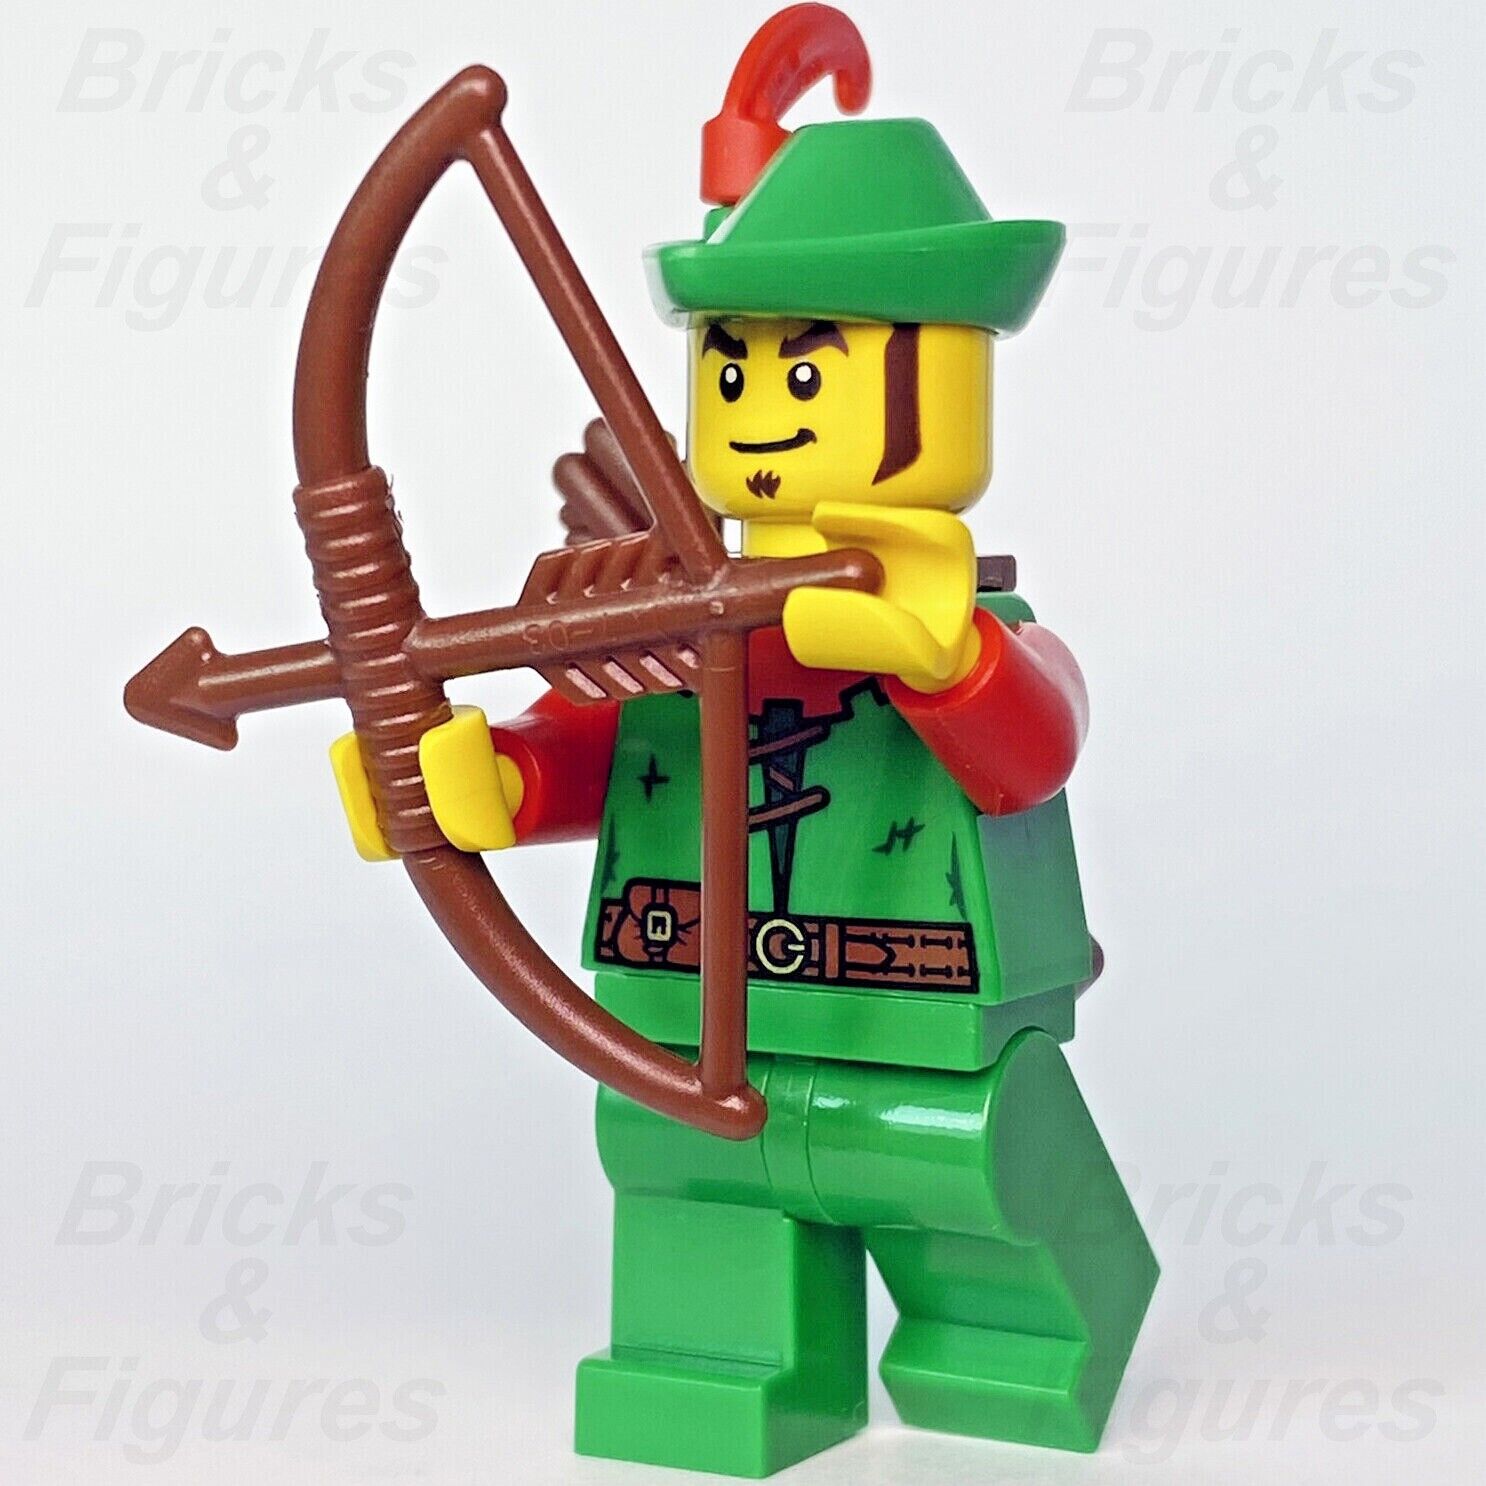 LEGO Forestman Castle Forestmen Minifigure with Bow & Quiver 40567 cas557 New - Bricks & Figures